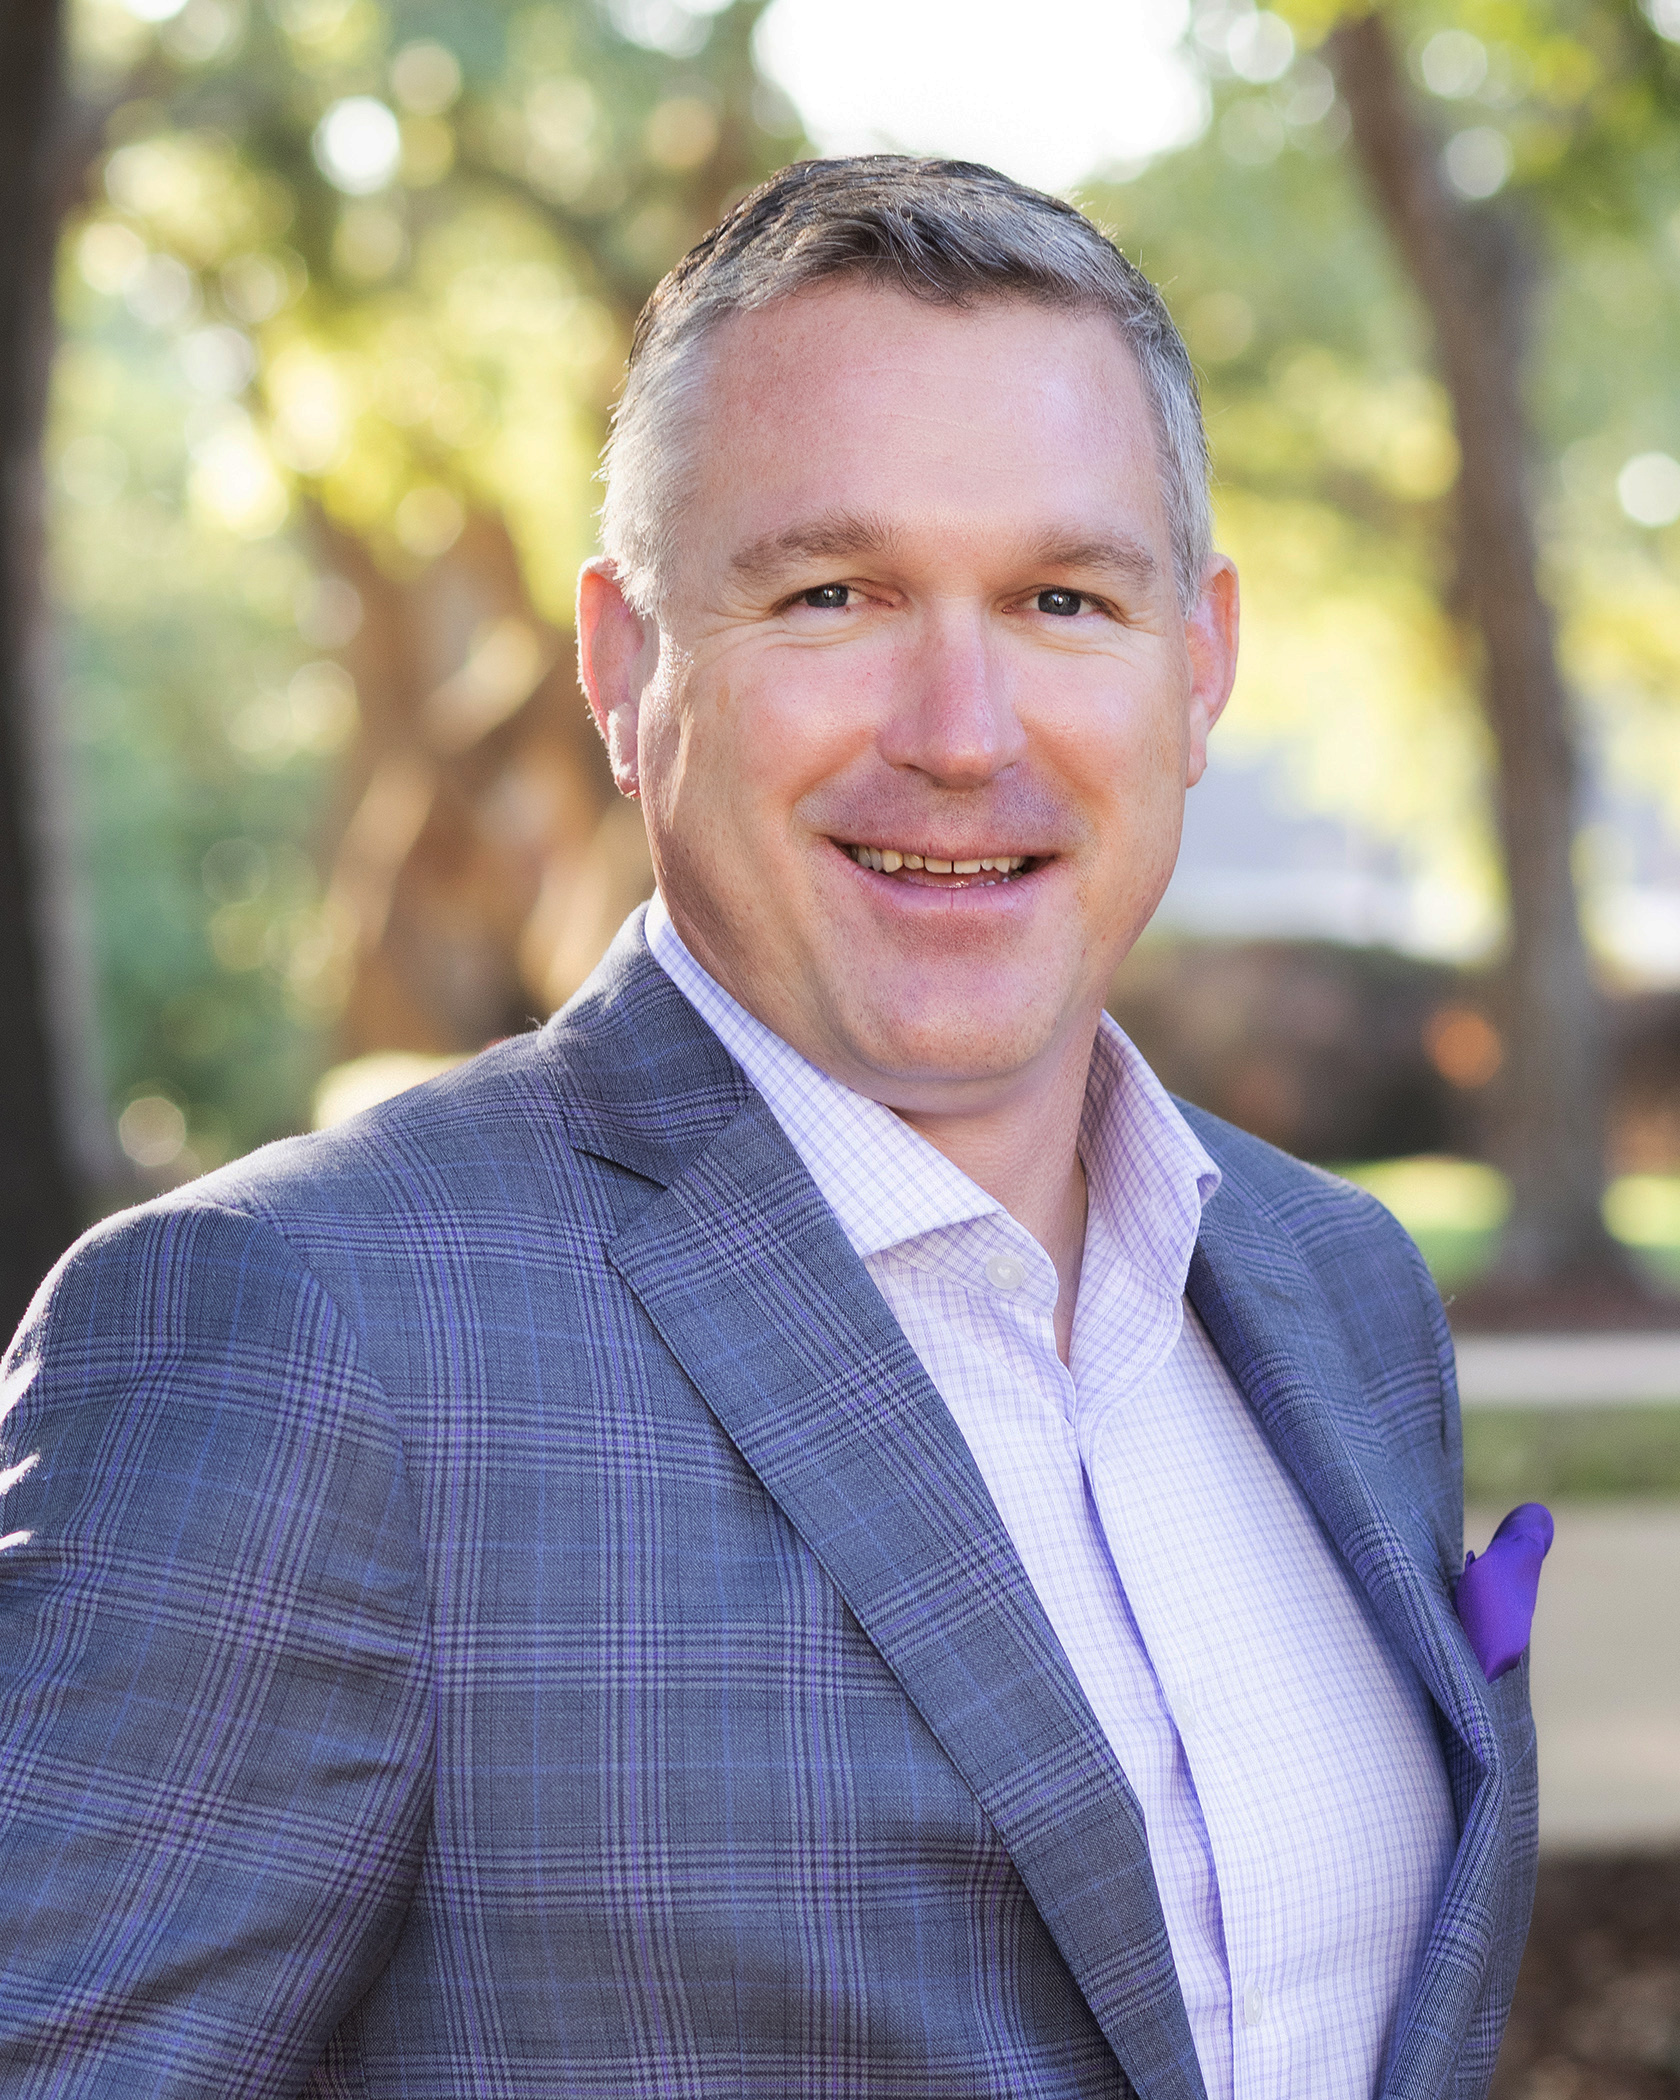 Aaron Pelch is Vice President of Enrollment at Millsaps College.